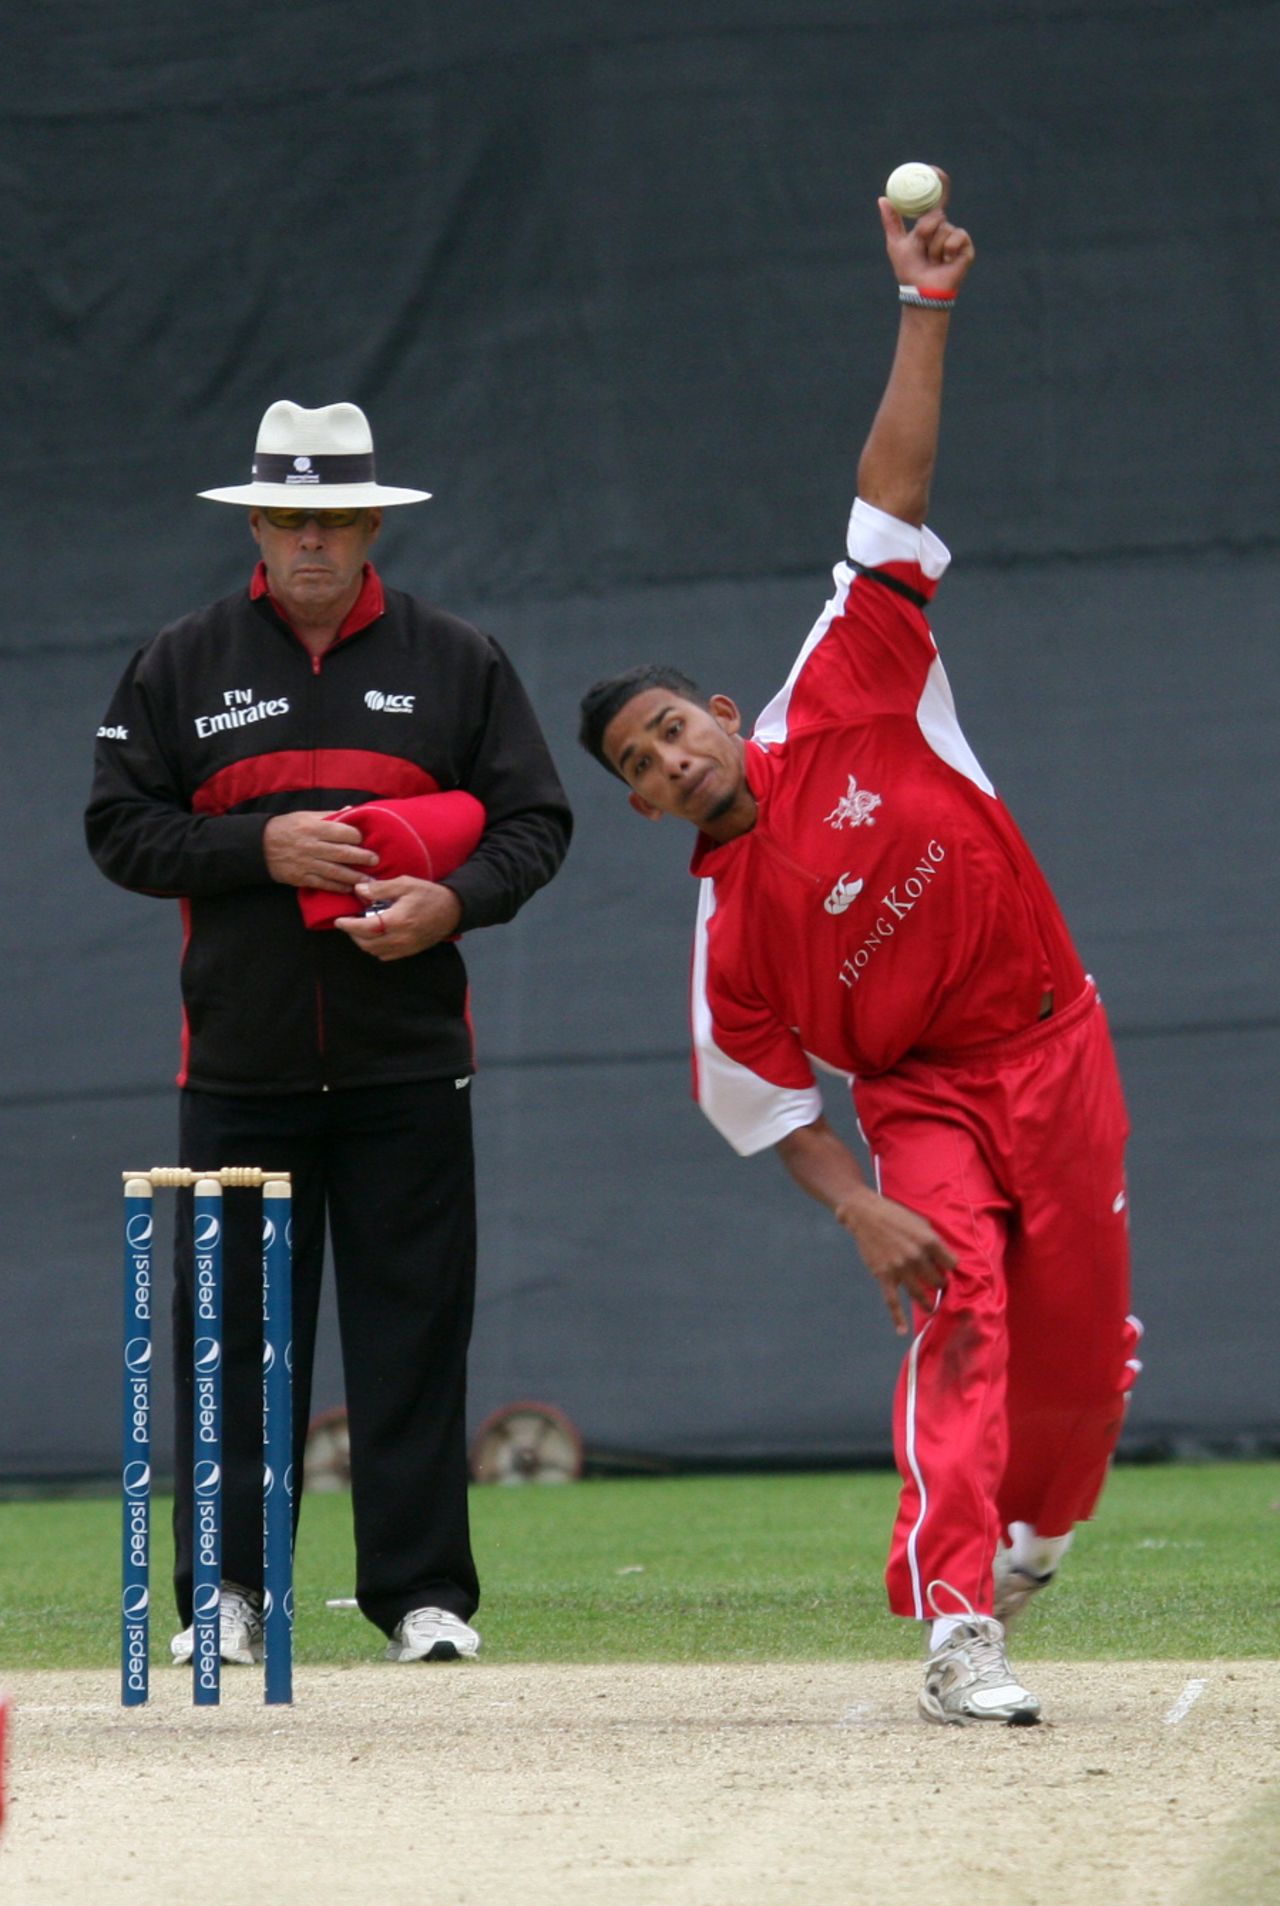 Nadeem Ahmed picked up one wicket against USA, Hong Kong v United States of America, WCL Div. Three, Kowloon, January 22, 2011